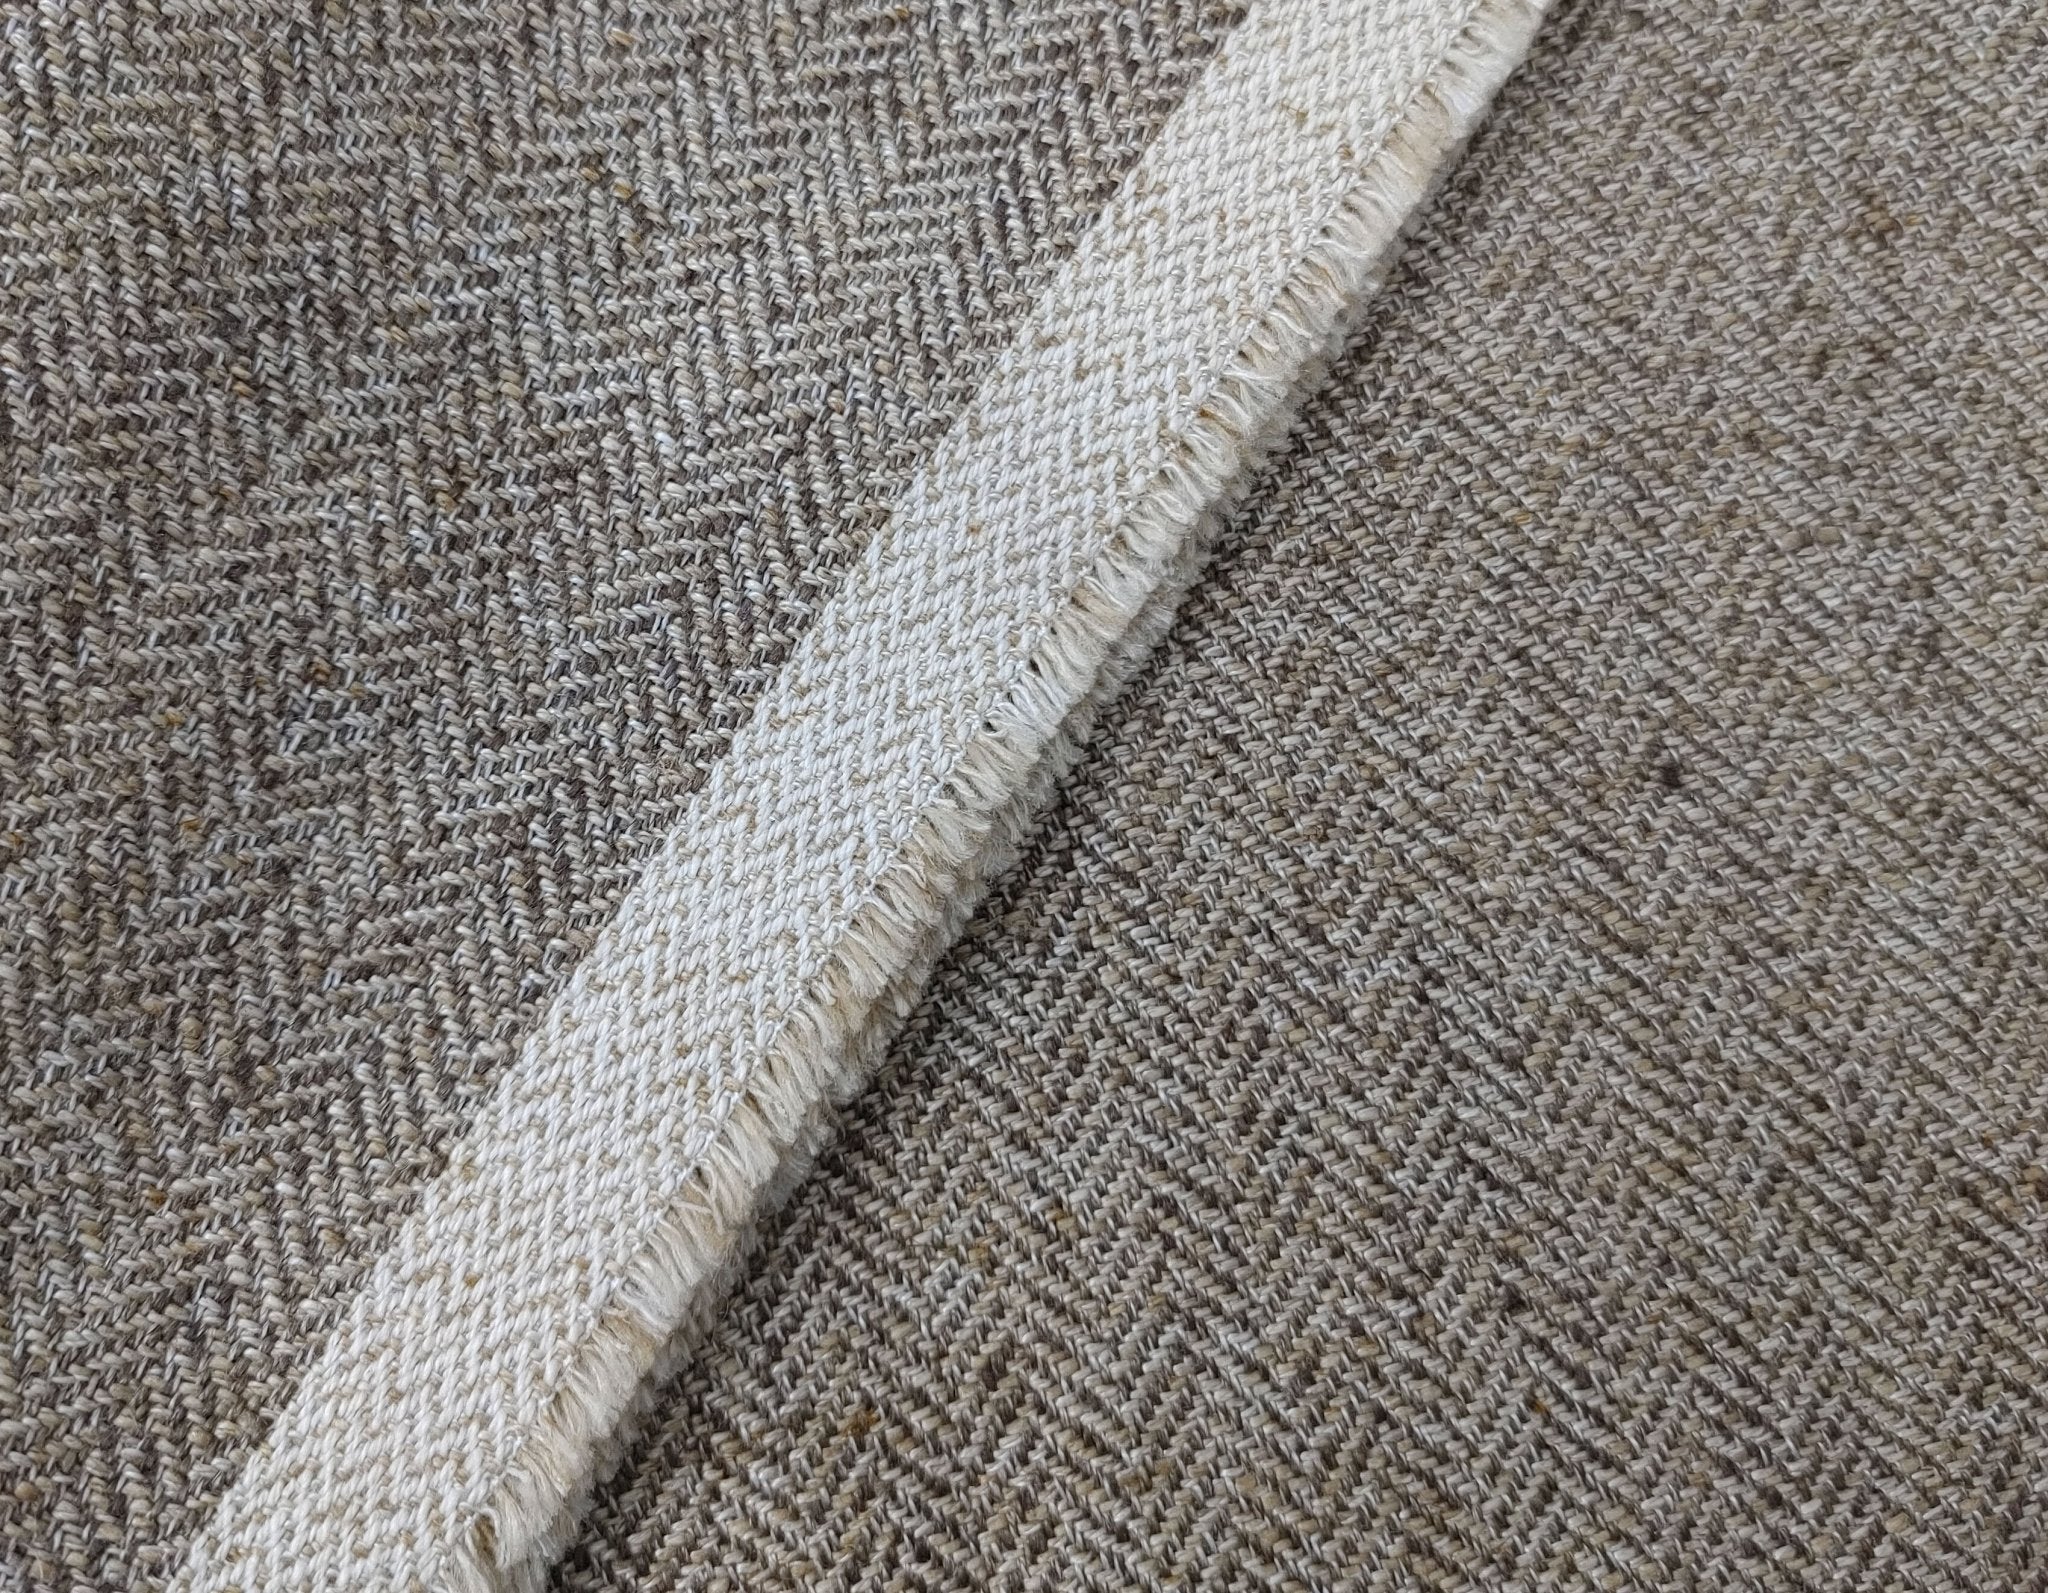 Linen Polyester HBT Herringbone Twill Fabric with Melange Effect Heavy Weight 7353 7821 - The Linen Lab - Beige